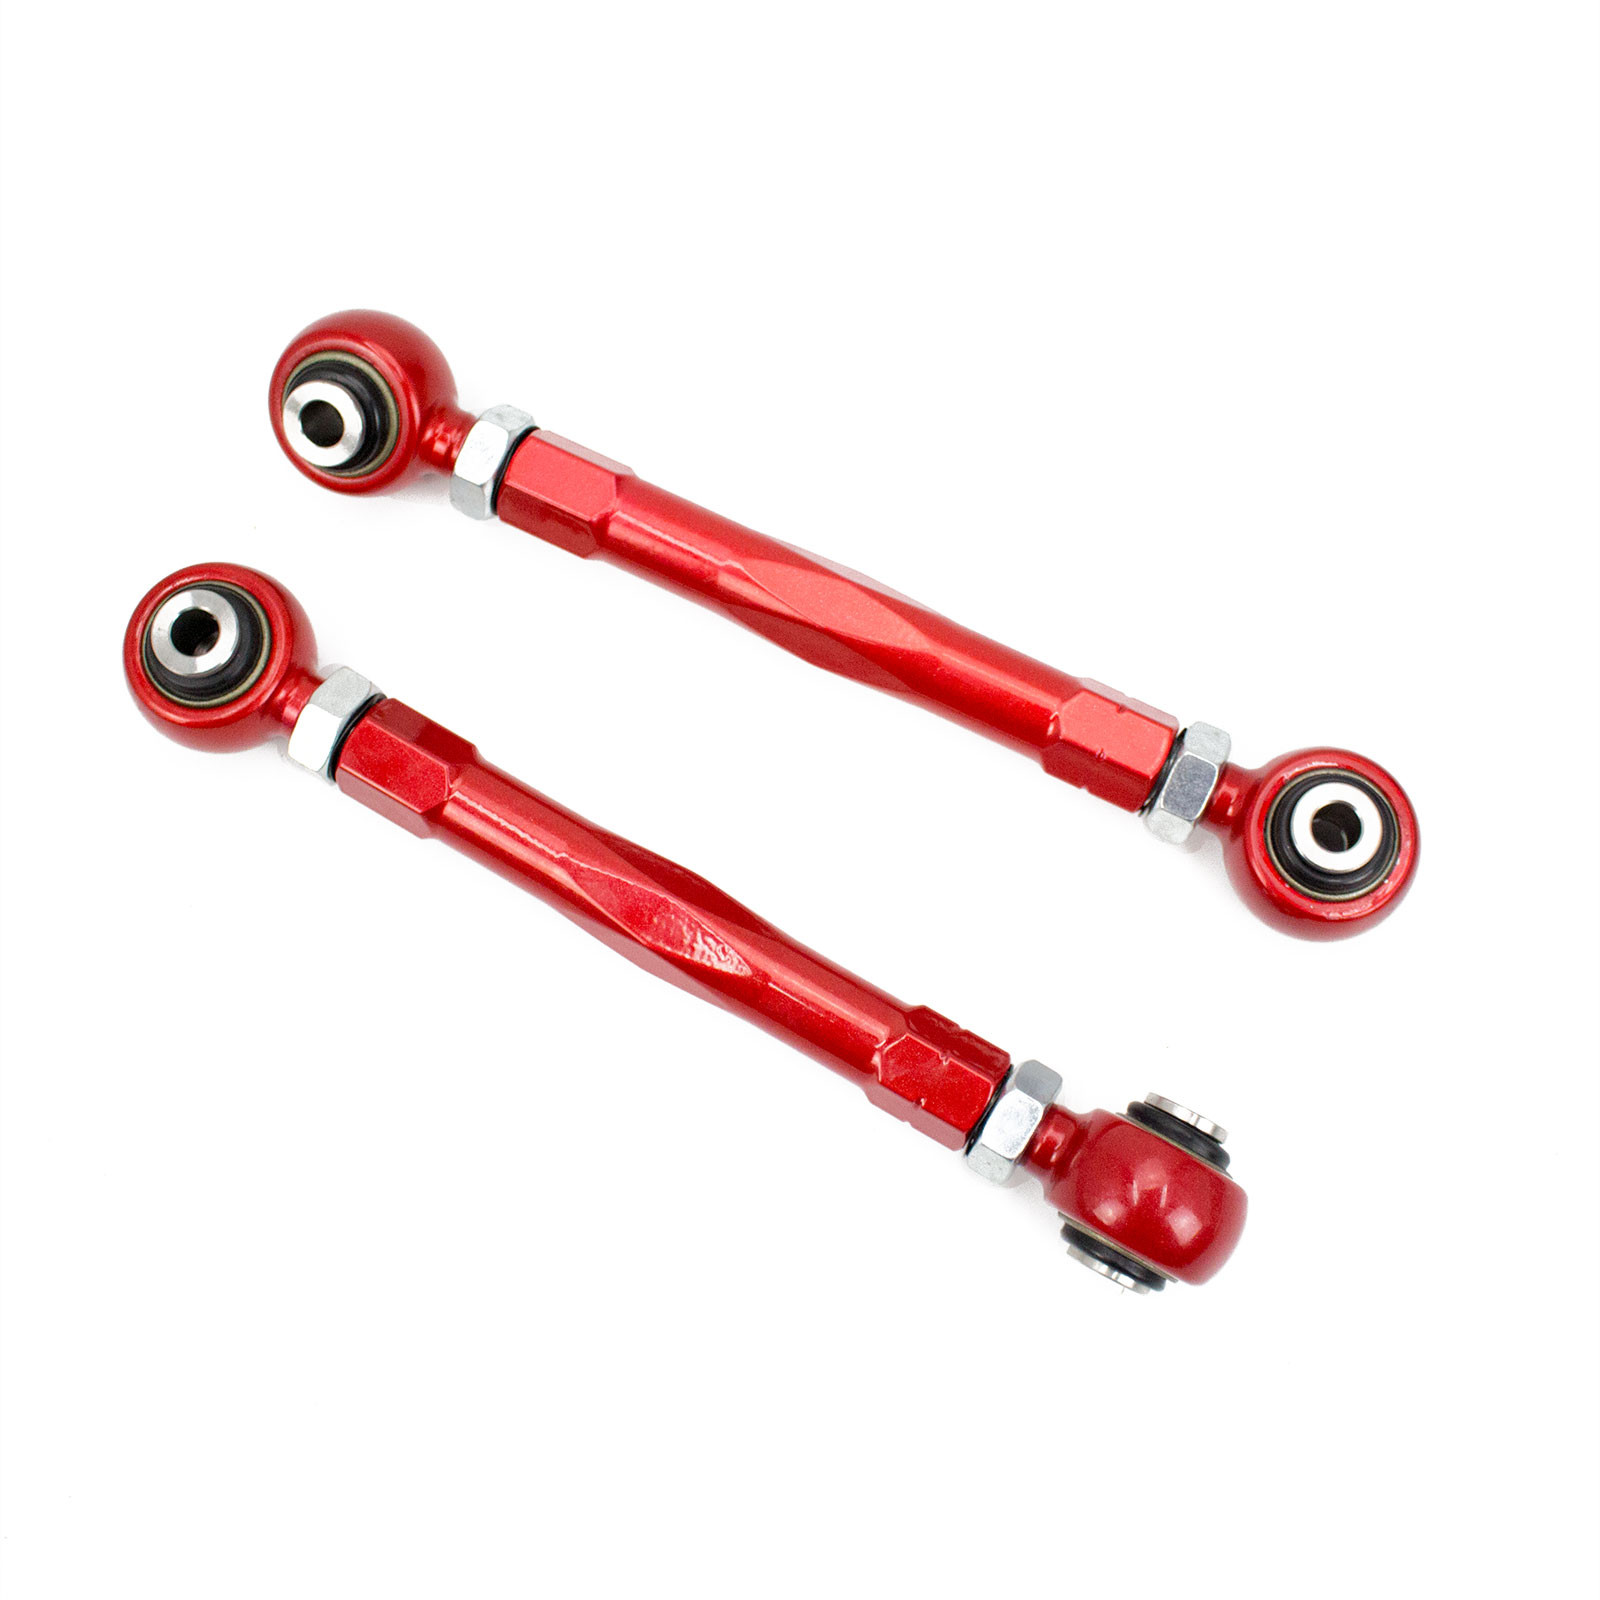 Godspeed AK-033-F Adjustable Rear Trailing Arms B11 Set of 2 compatible with Subaru Legacy Pillow Ball Spherical Bearing High Tensile Steel Alloy 1995-99 All Models 